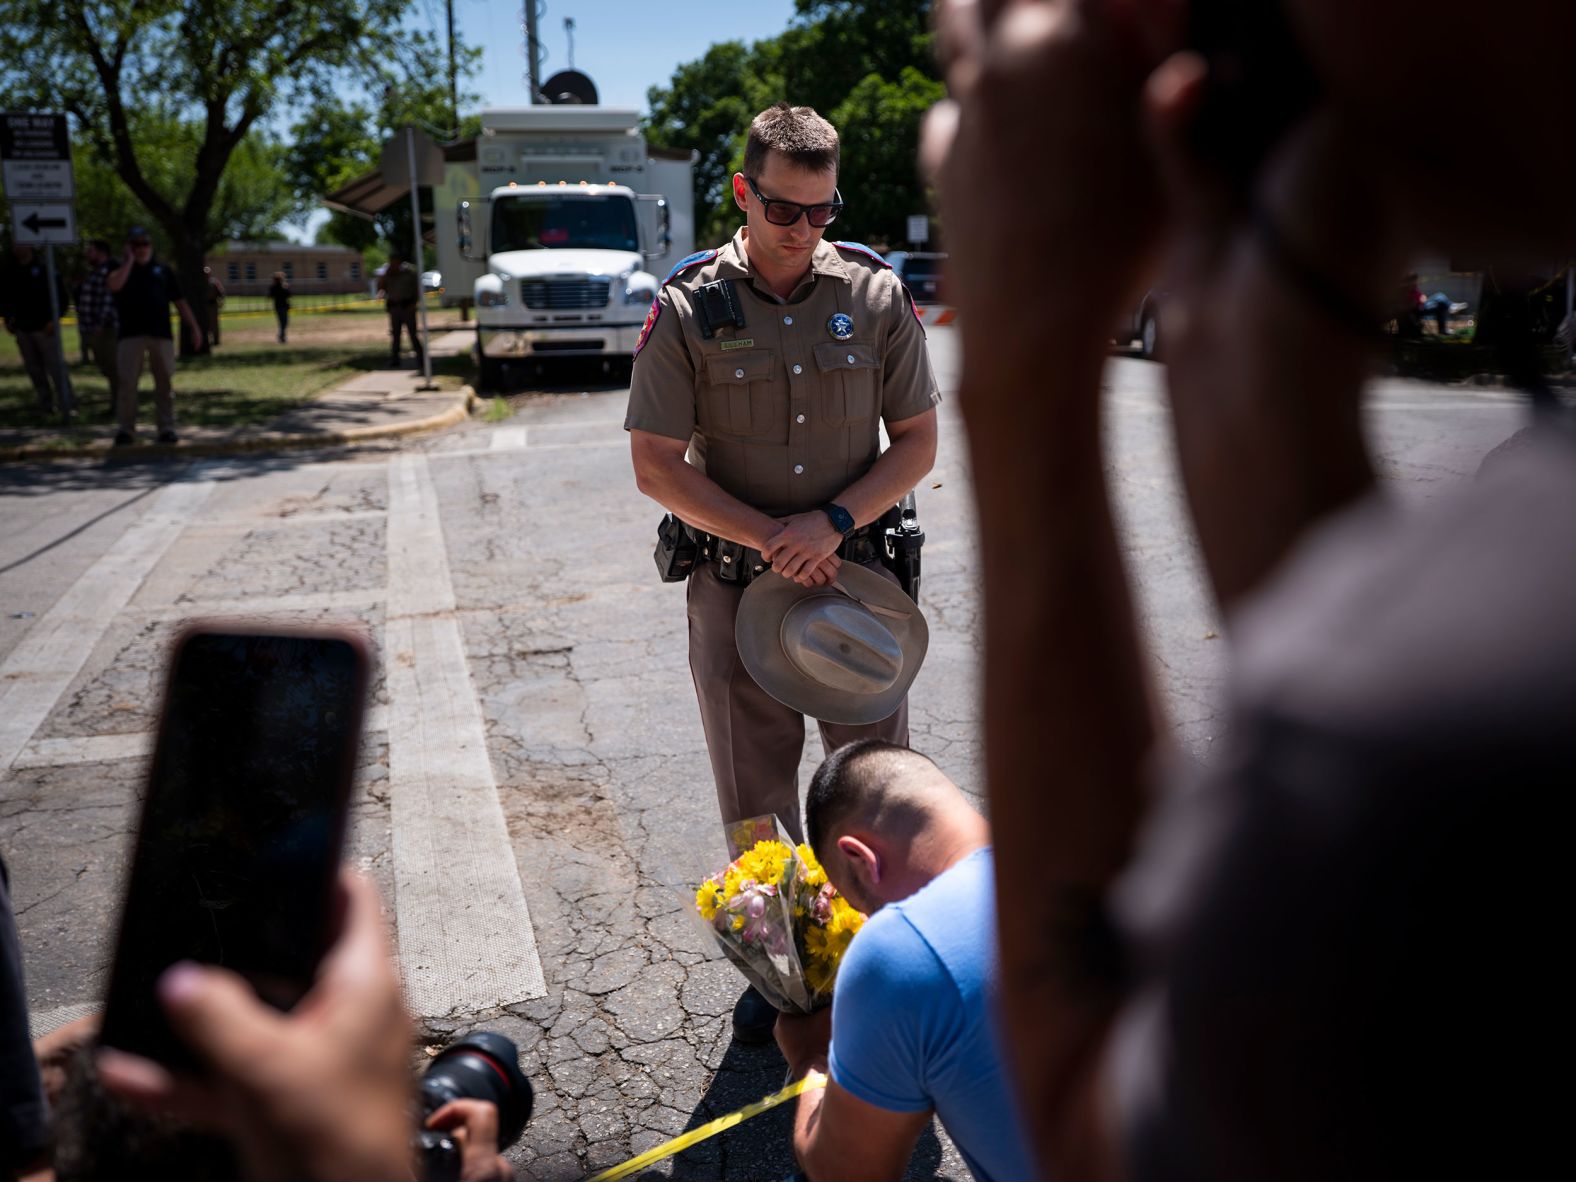 An officer with the Texas Highway Patrol prays with a community member before taking his flowers to the growing memorial in front of Robb Elementary School.